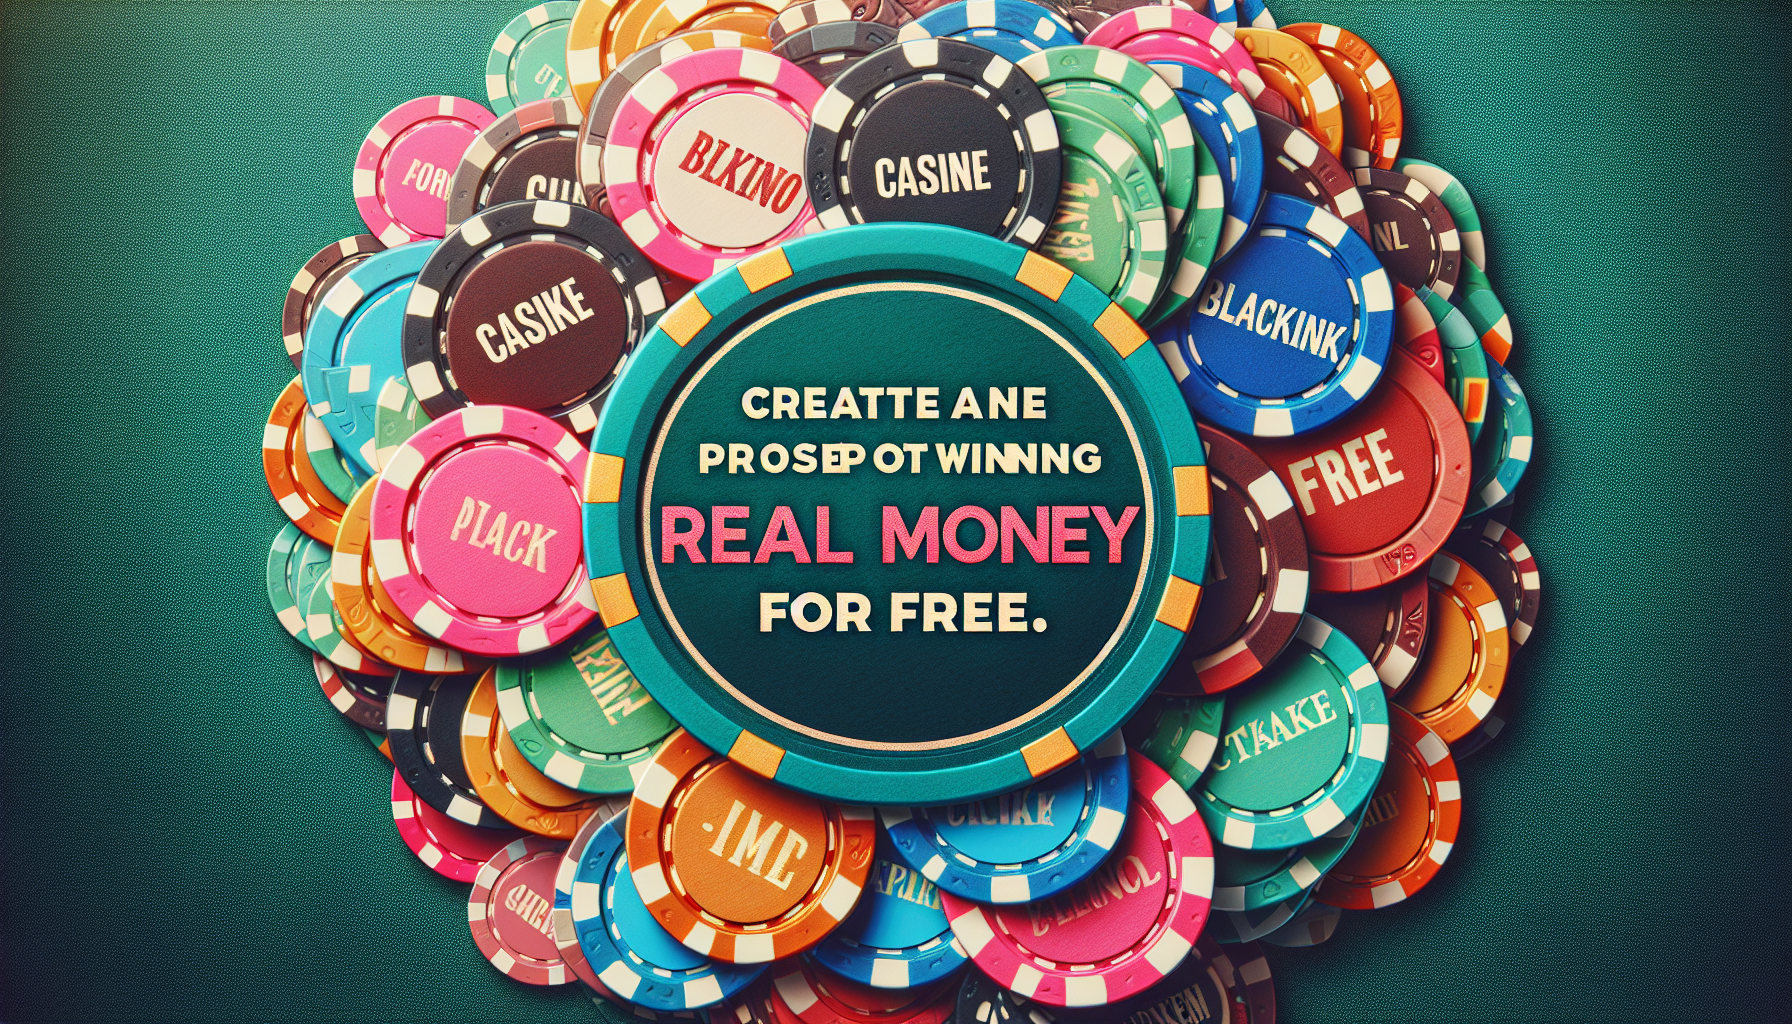 Can I Play Online Blackjack for Free and Win Real Money?